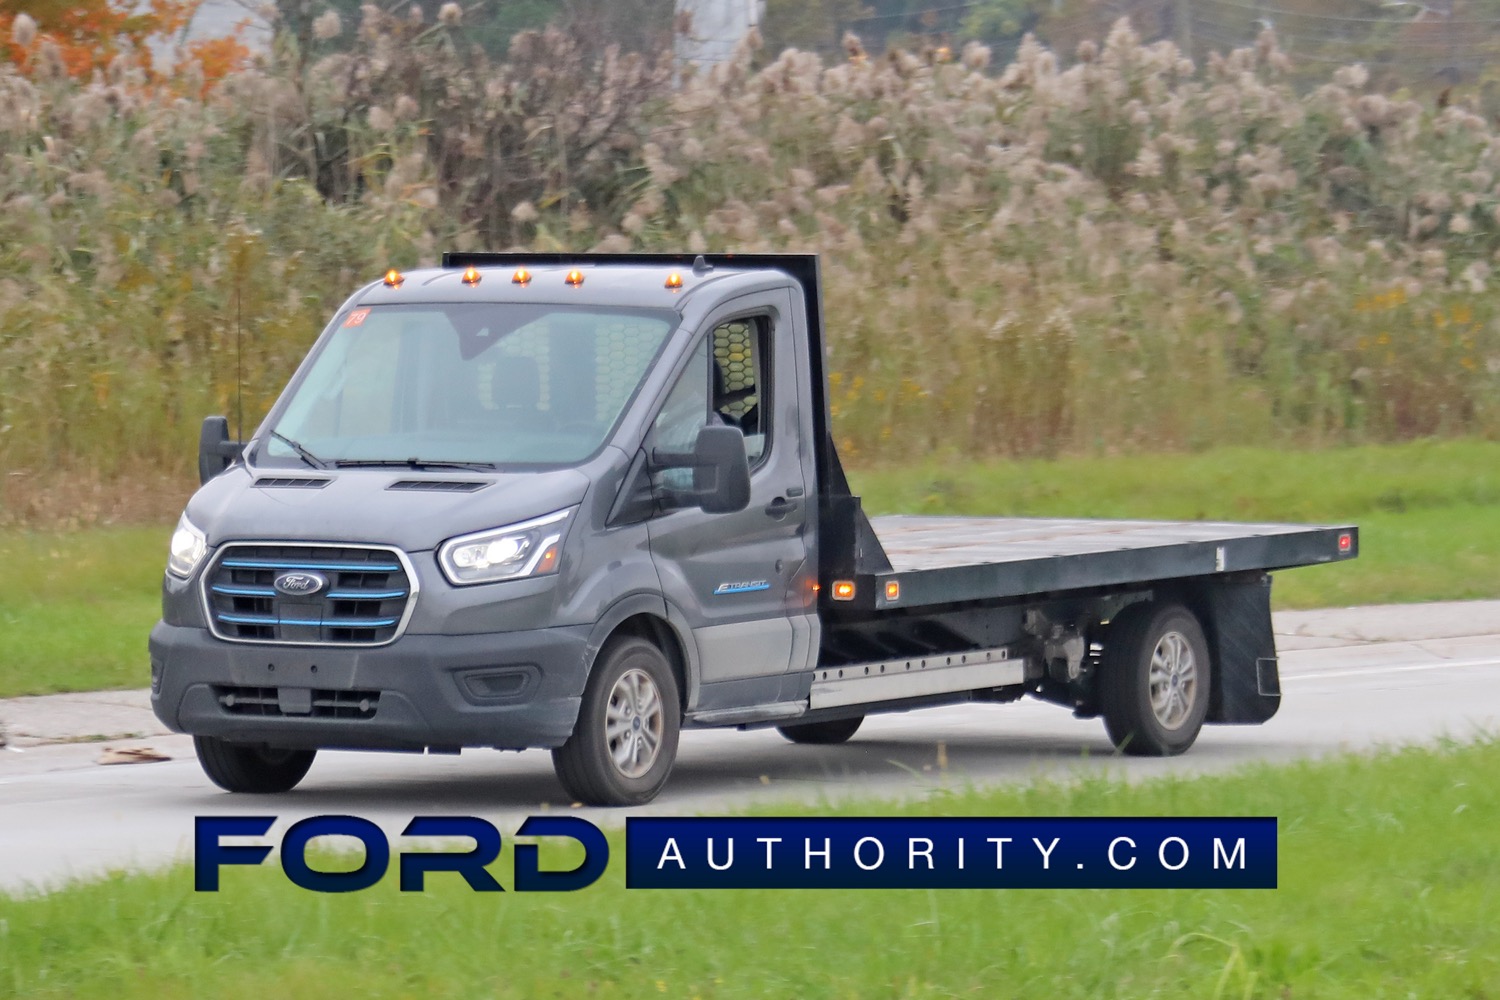 2022 Ford E-Transit Chassis Cab Spotted ...